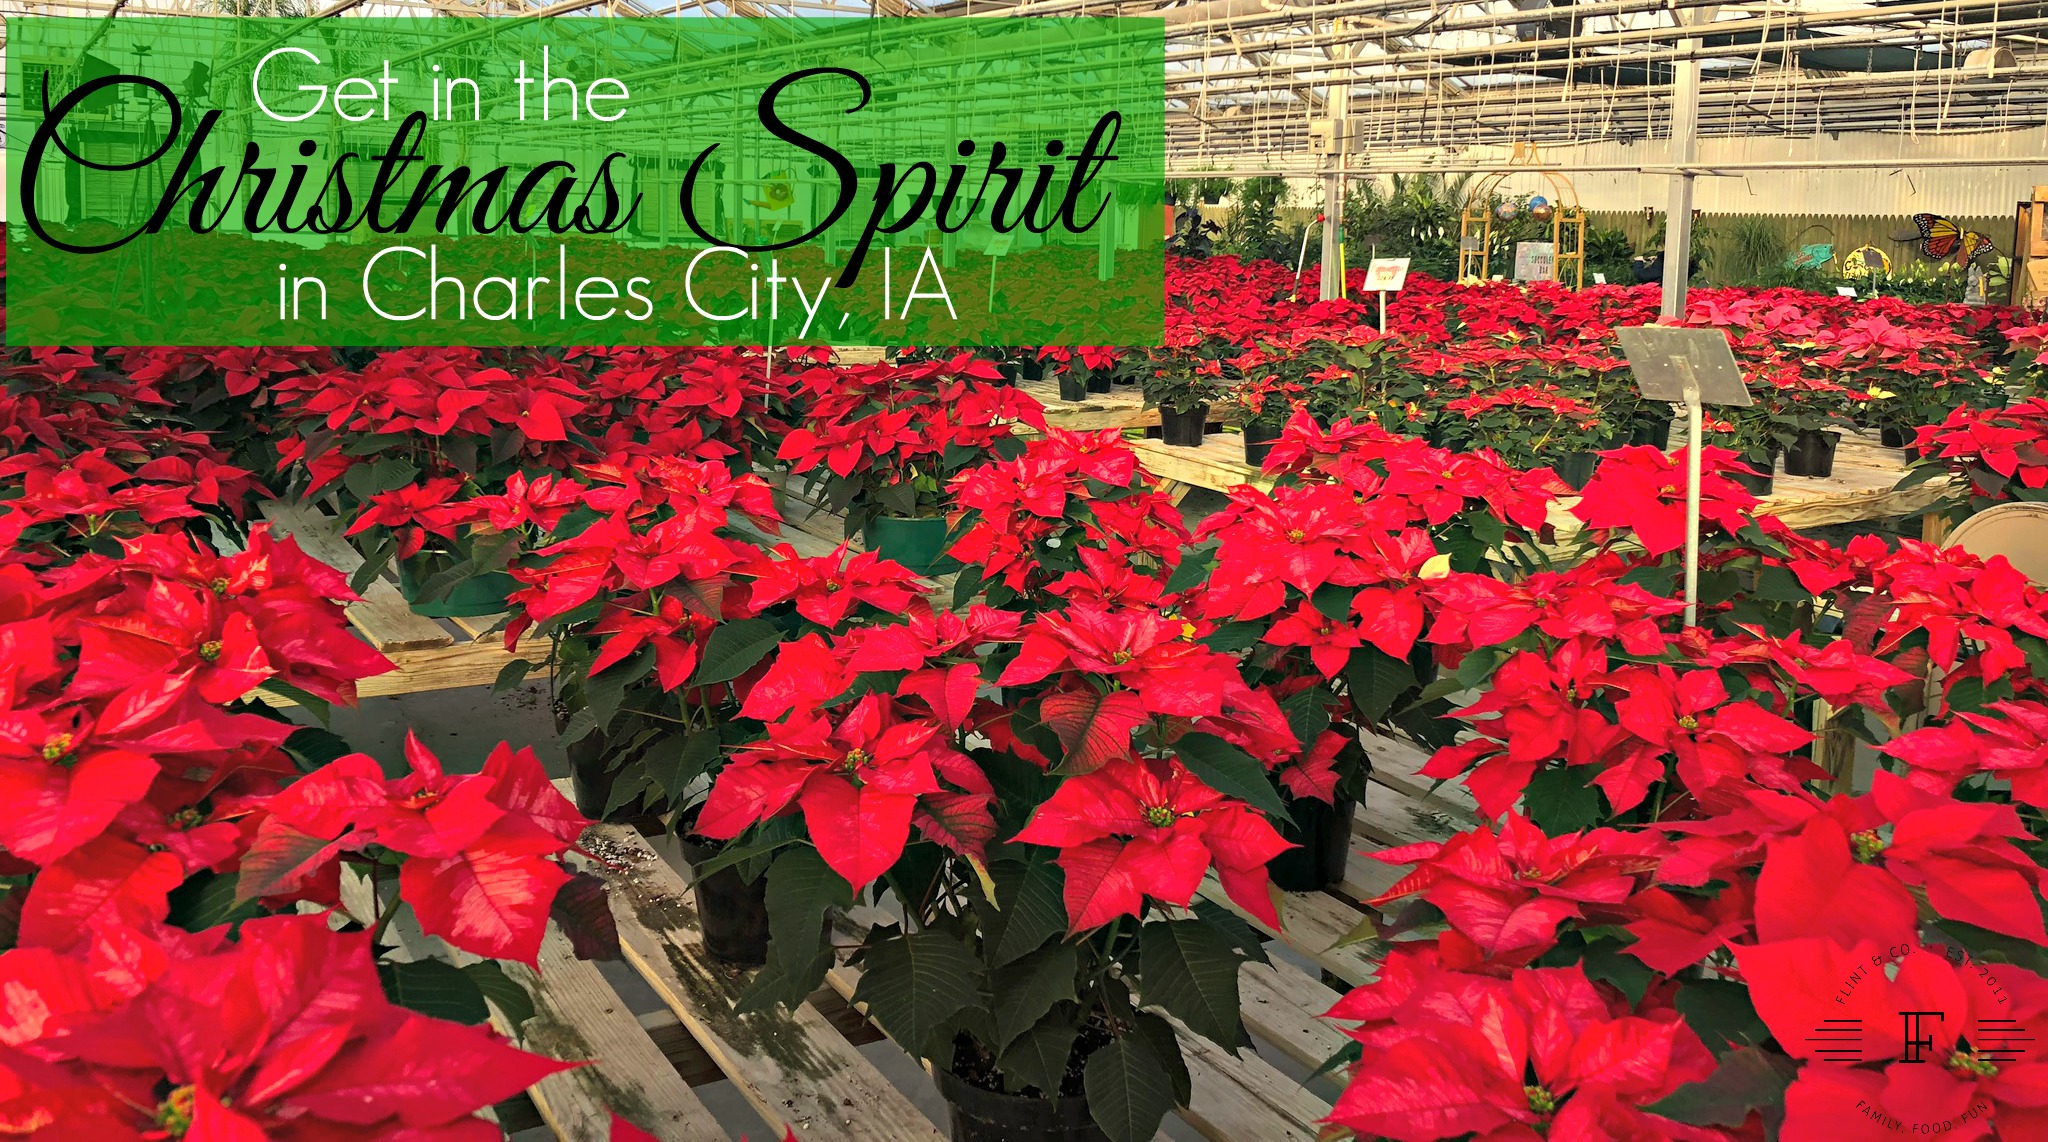 Spend the Holidays in Charles City, Iowa